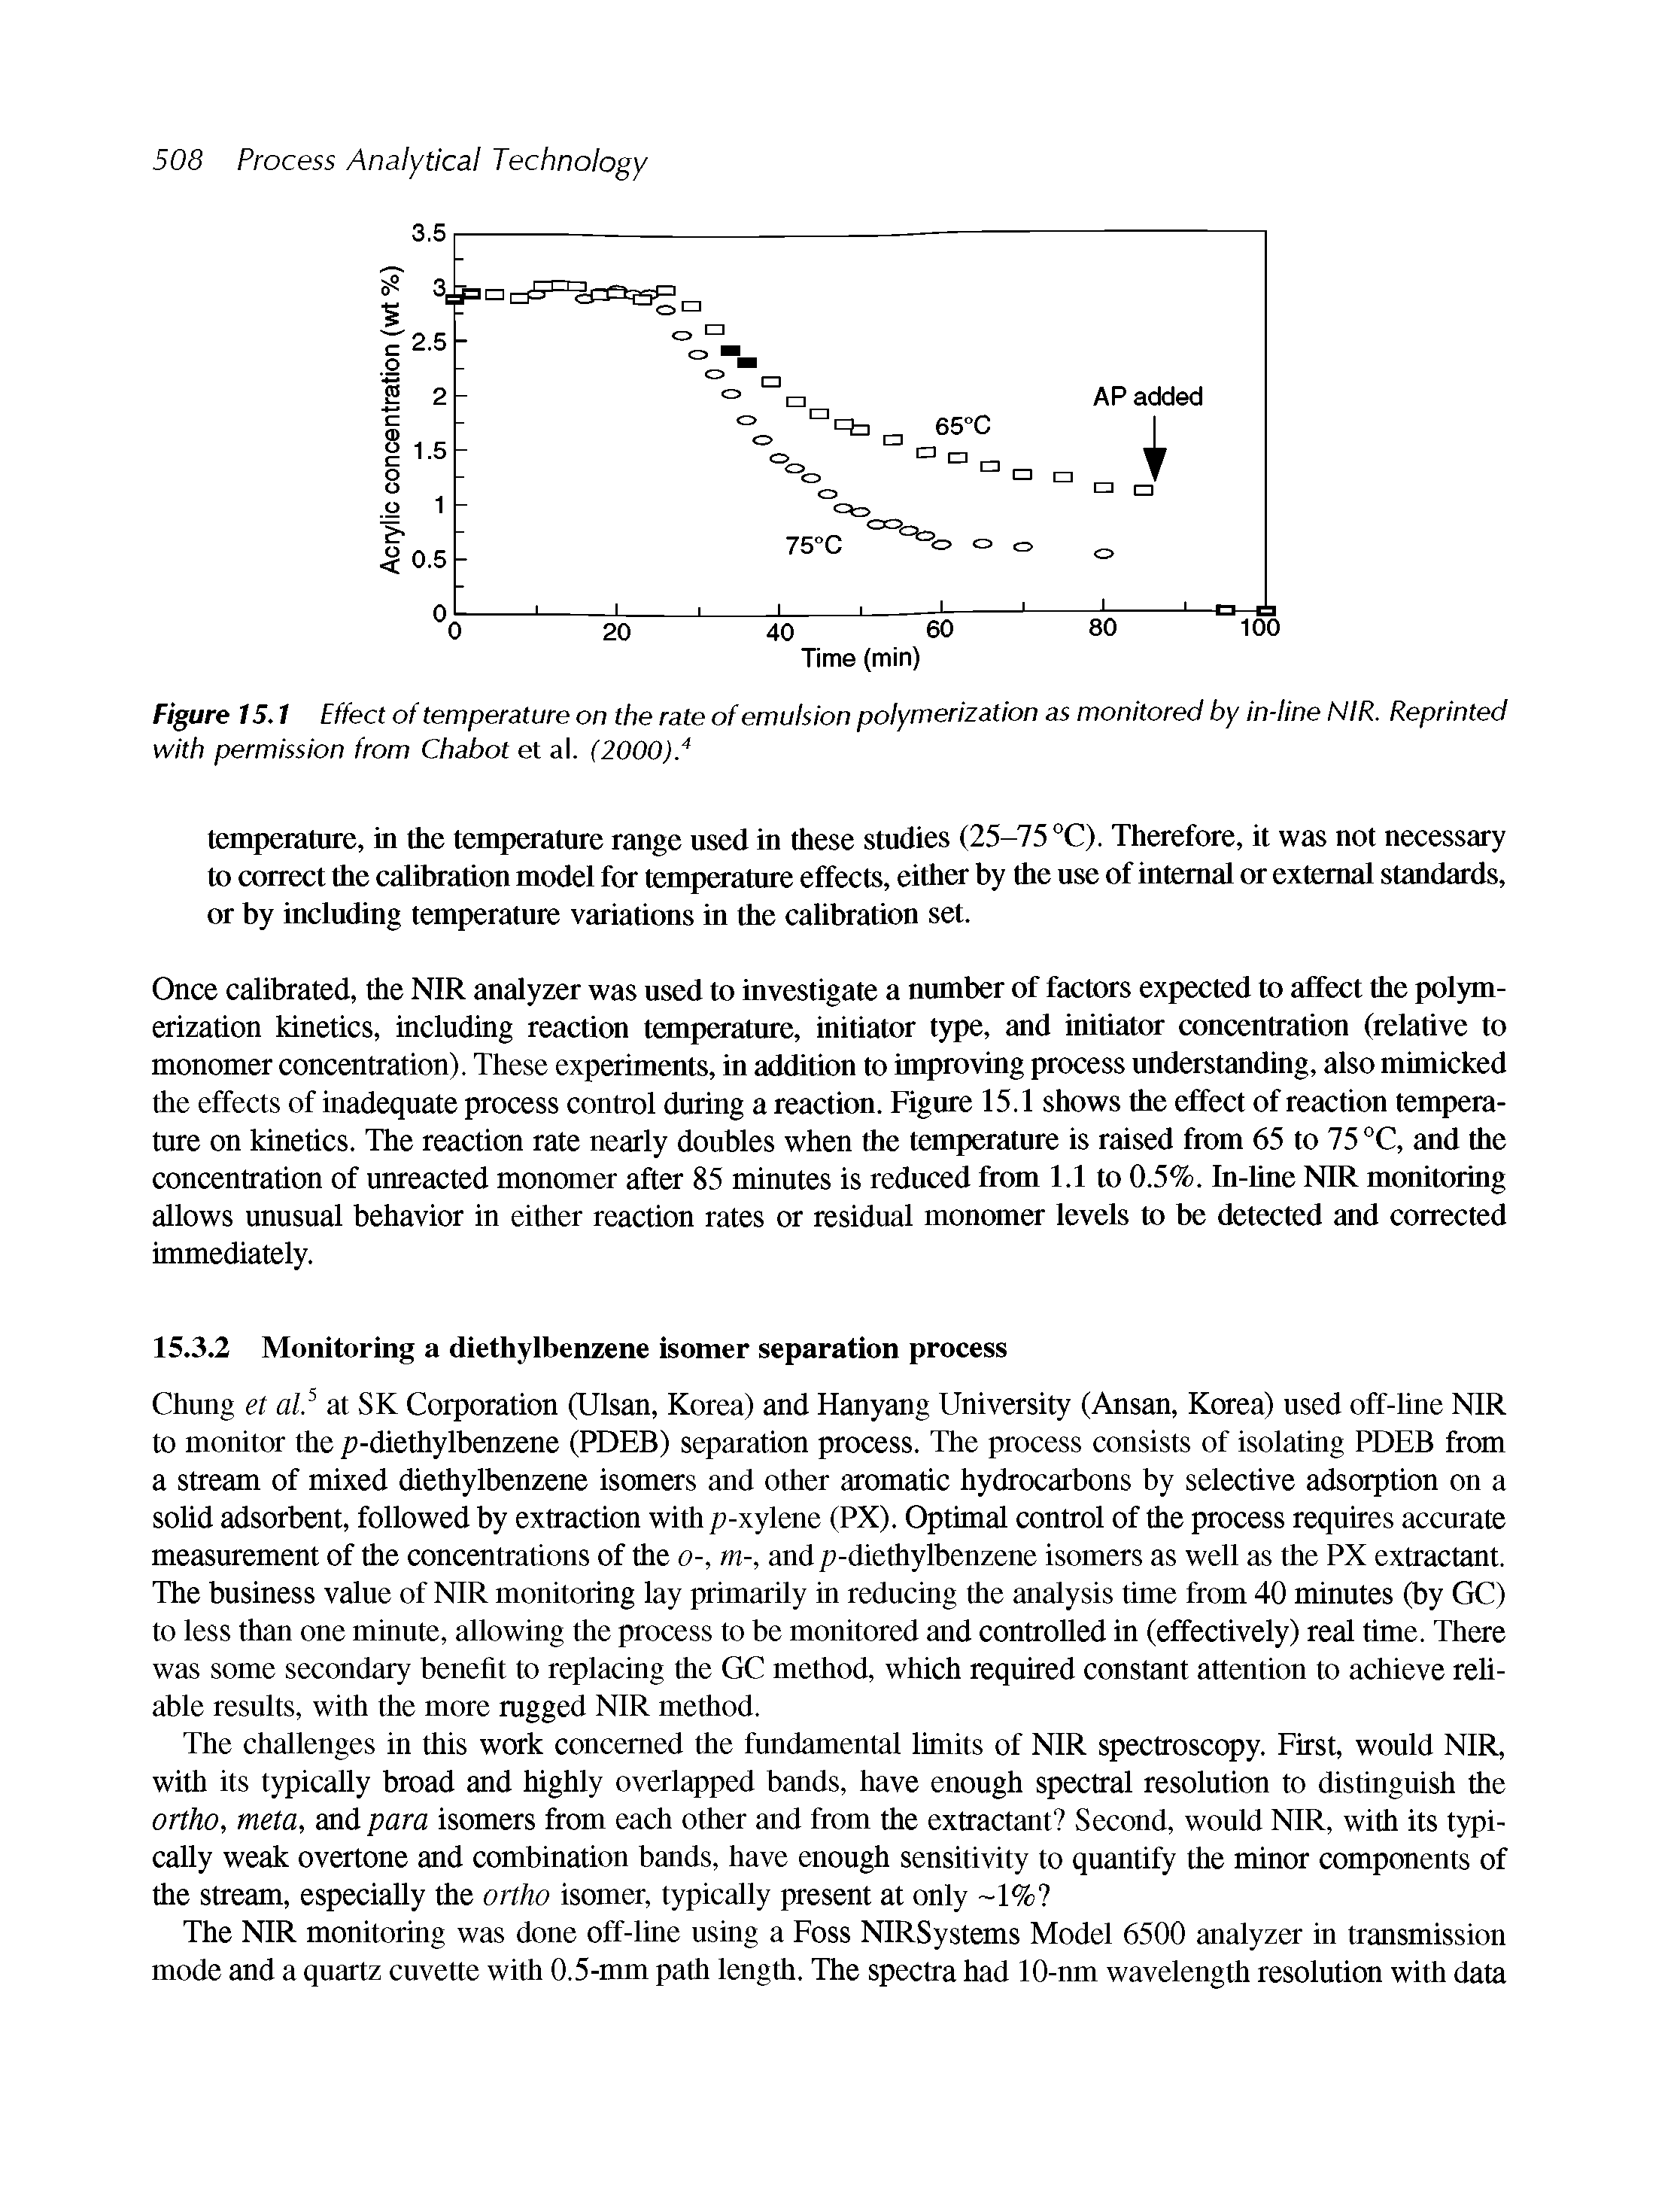 Figure 15.1 Effect of temperature on the rate of emulsion polymerization as monitored by in-line NIR. Reprinted with permission from Chabot et al. (2000). ...